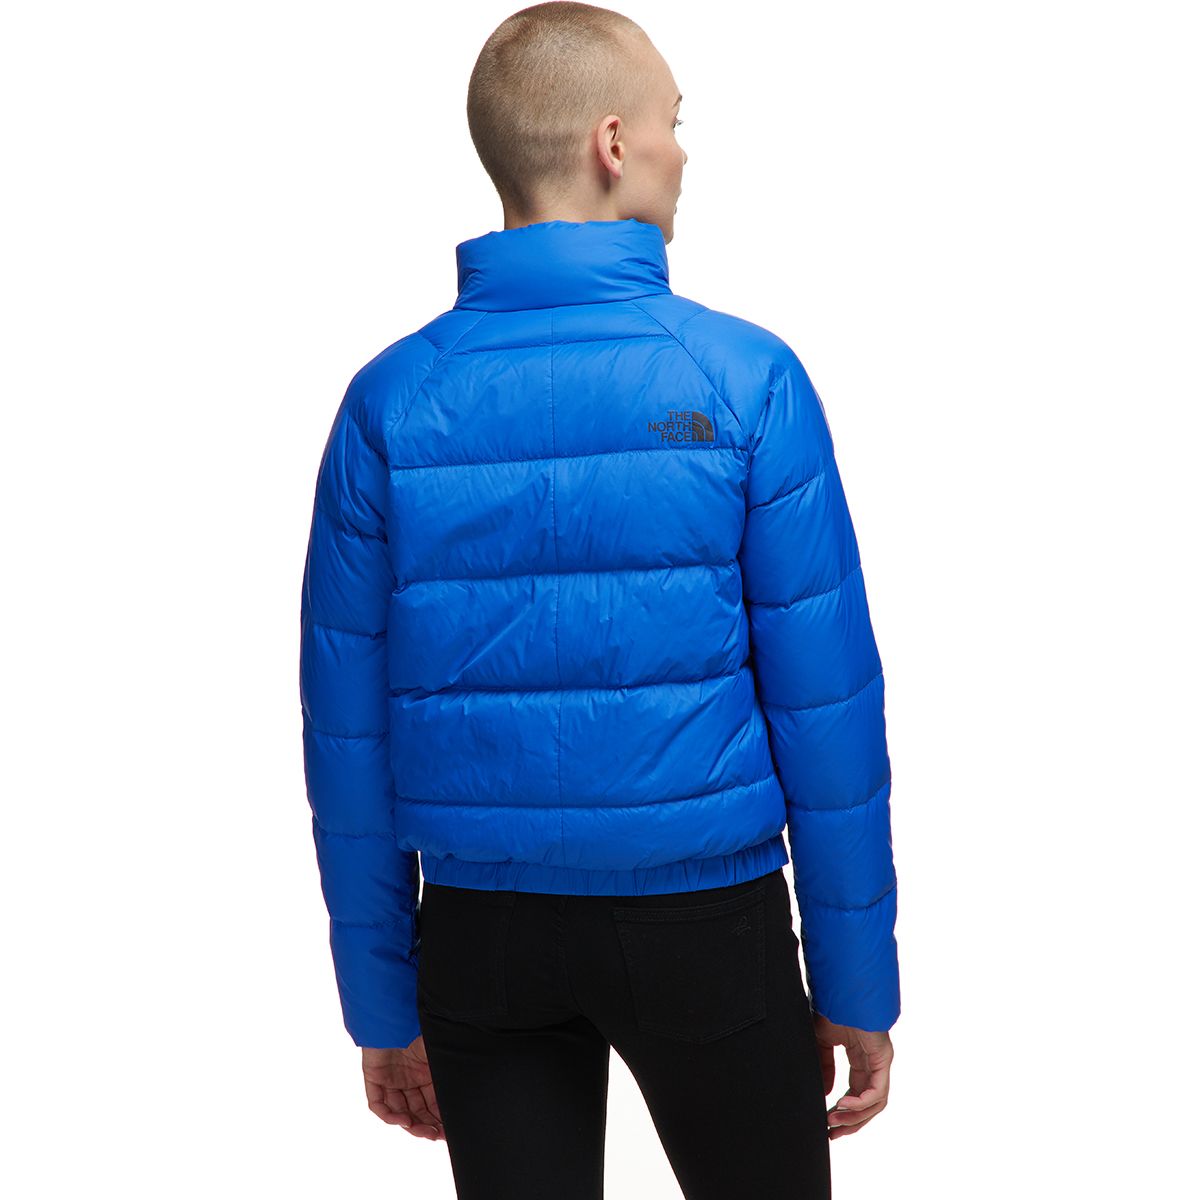 The North Face Hyalite Down Jacket - Women's - Clothing